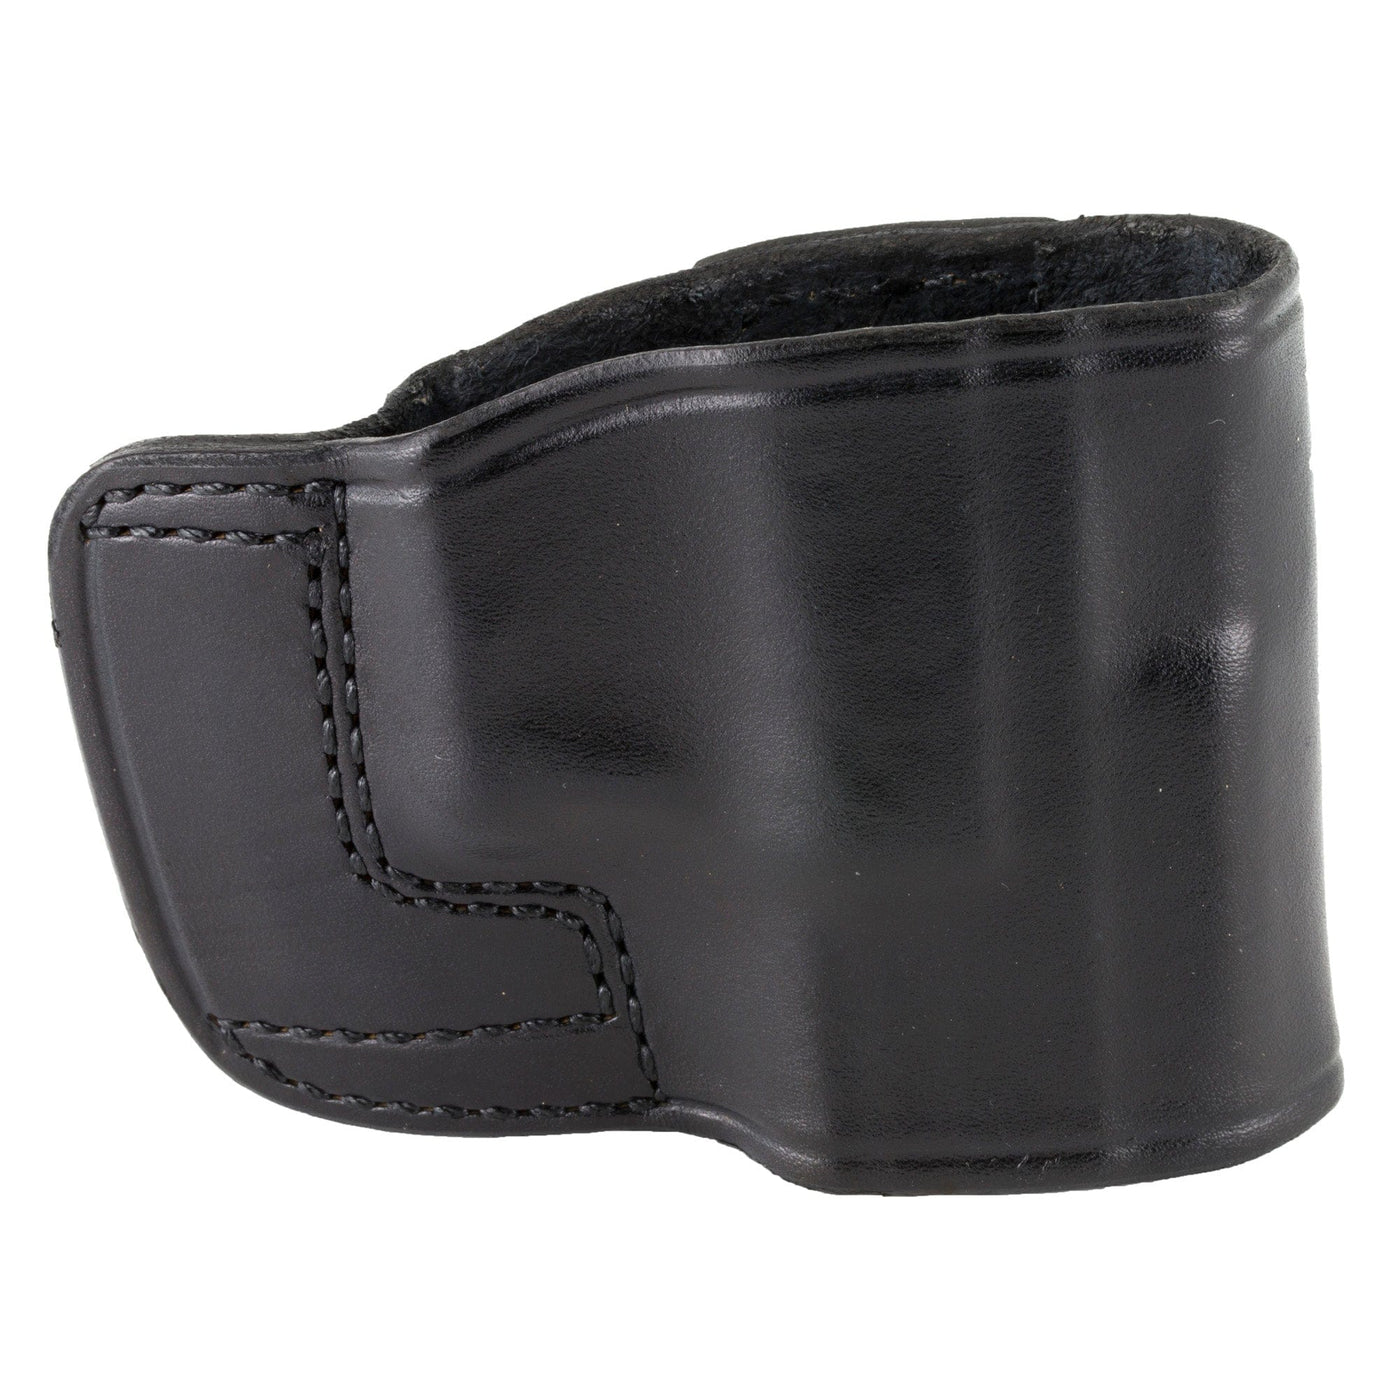 Don Hume D Hume Jit Xd9/40 Sig Sp2022 Blk Rh Holsters